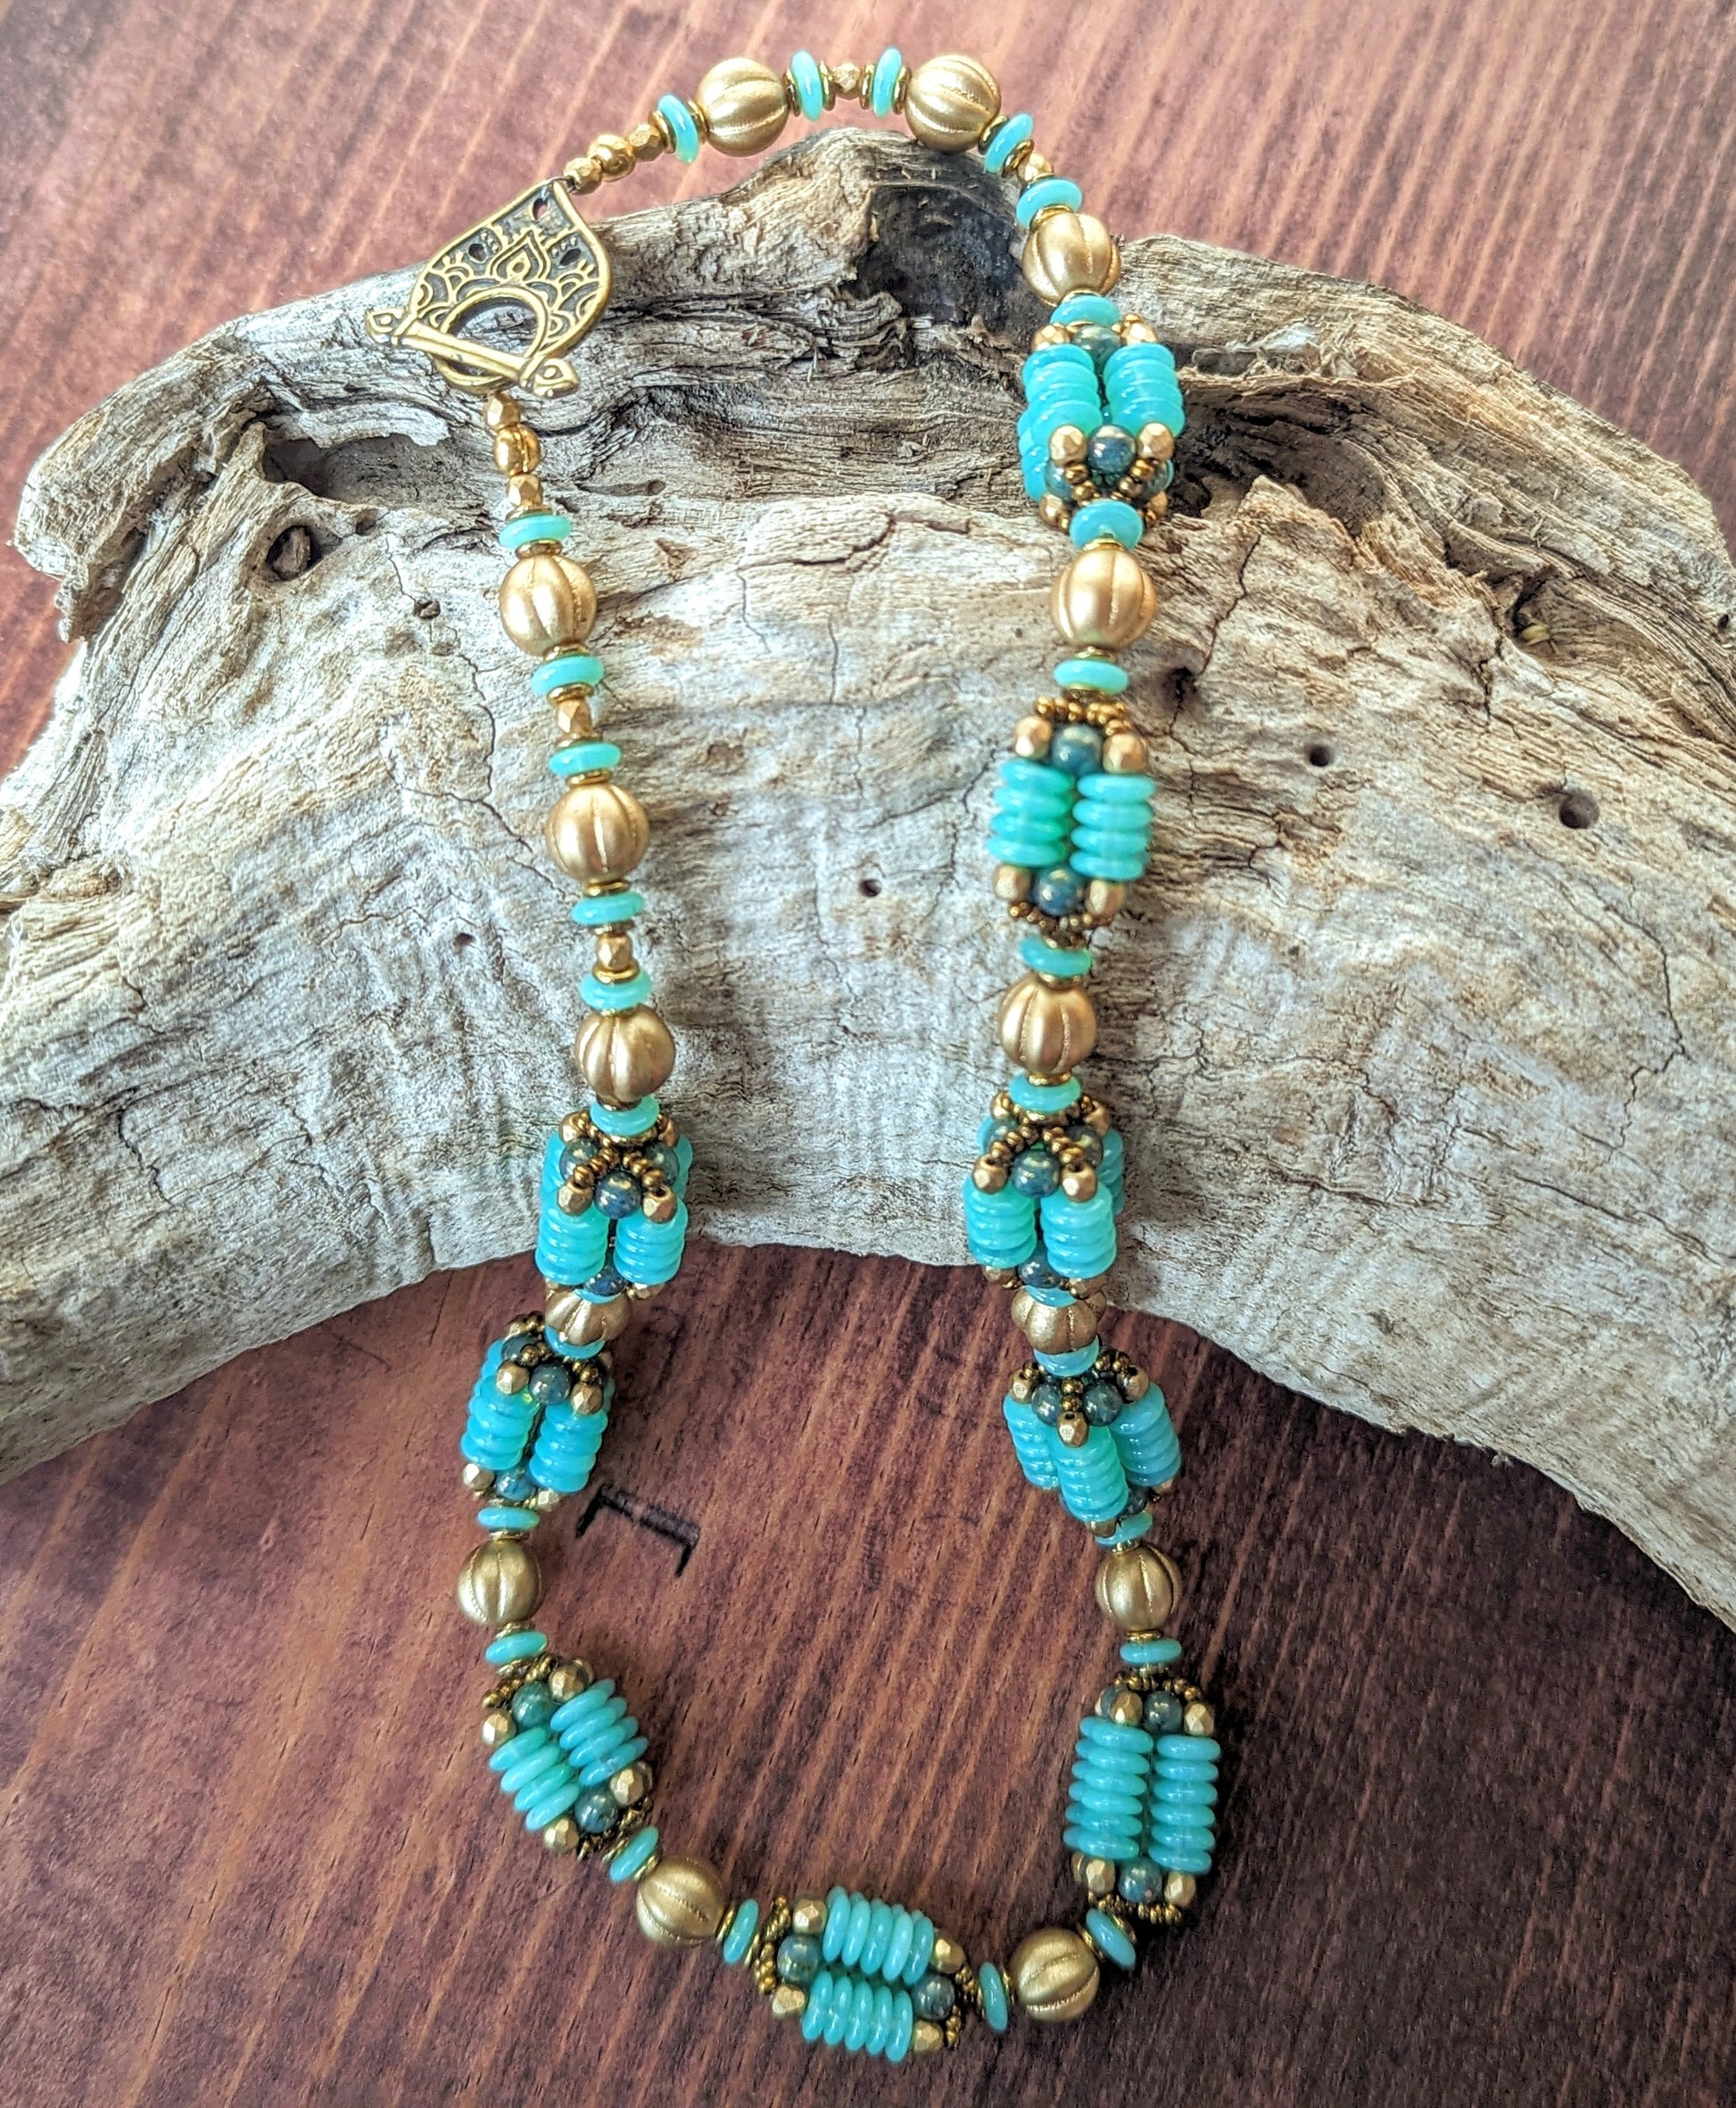 A light seafoam teal and gold necklace is draped across a piece of driftwood. The necklace has an alternating pattern of gold and seafoam beads, with nine handmade beaded beads with columns of light opalescent seafoam Czech glass discs with lustered teal accents. The necklace has a delicately patterned teardrop shaped brass toggle clasp.